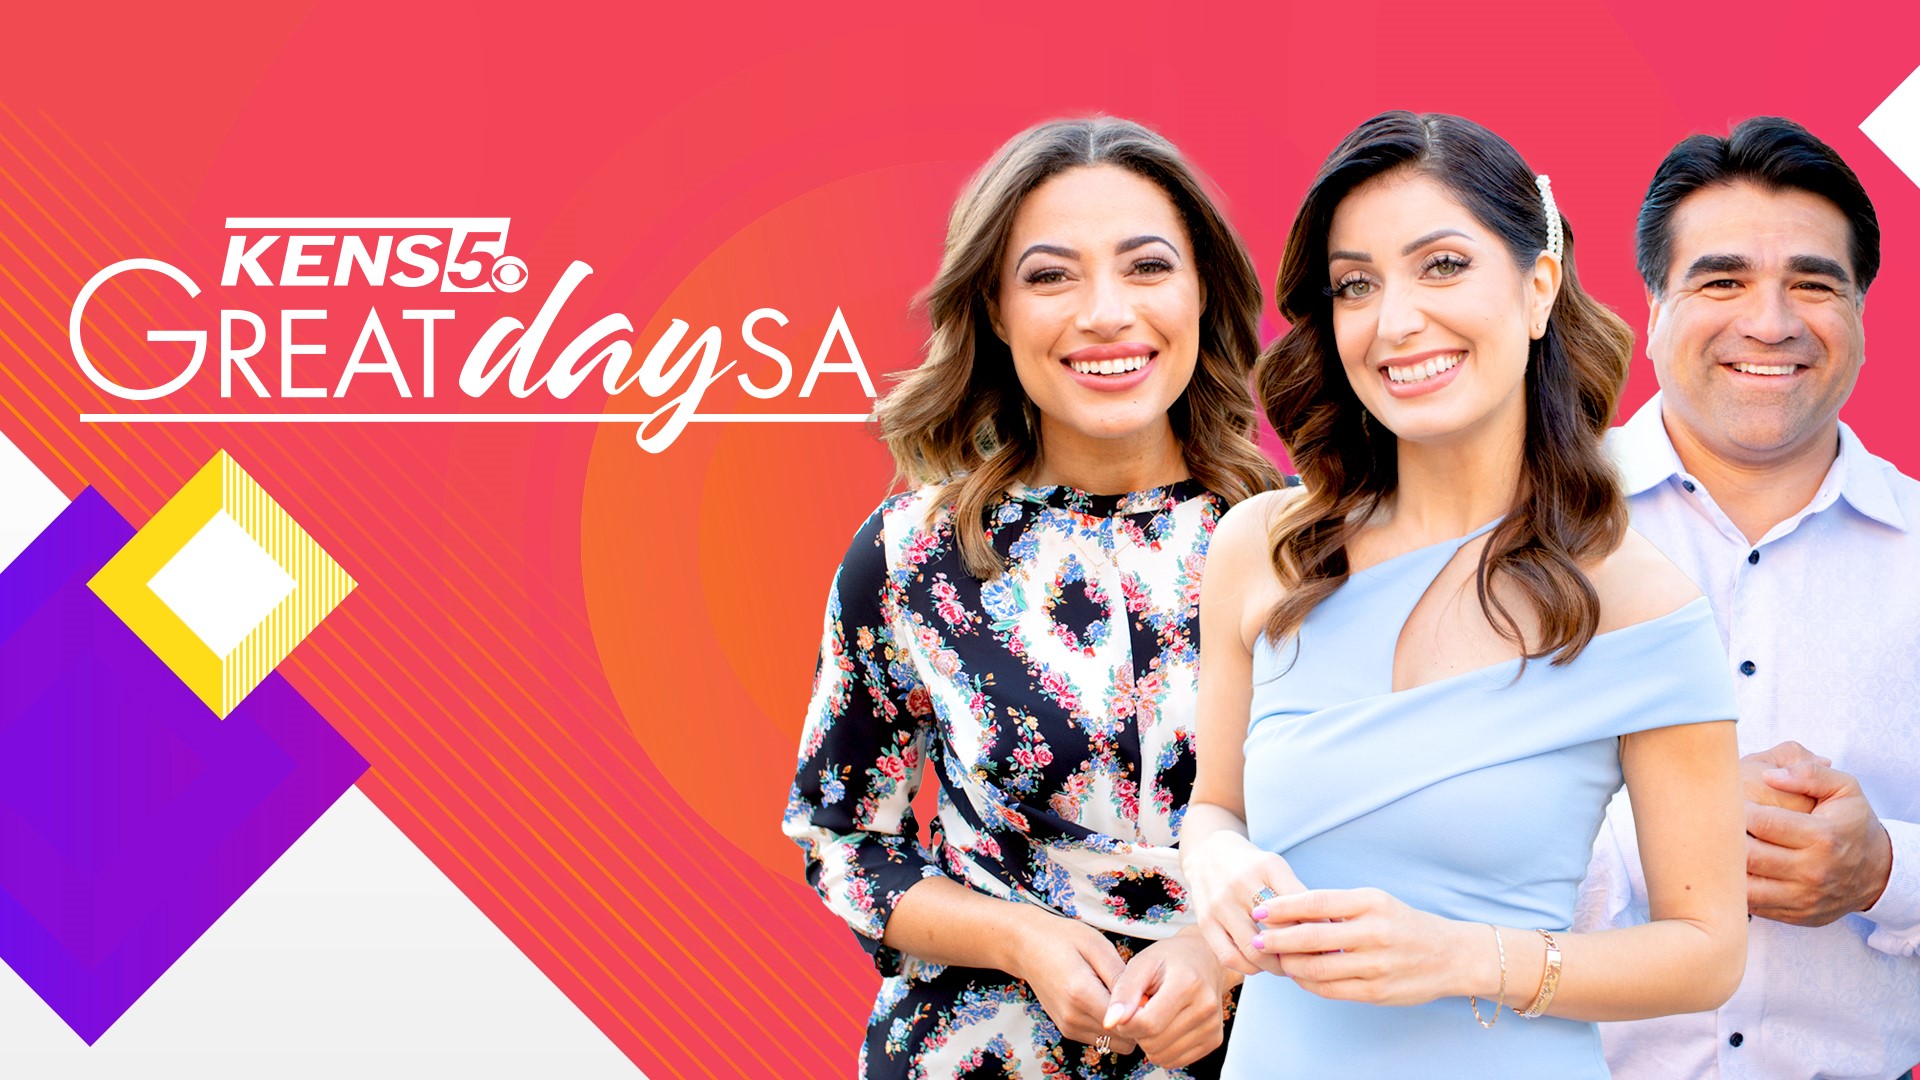 Join the Great Day SA team for the latest in San Antonio lifestyle and entertainment.